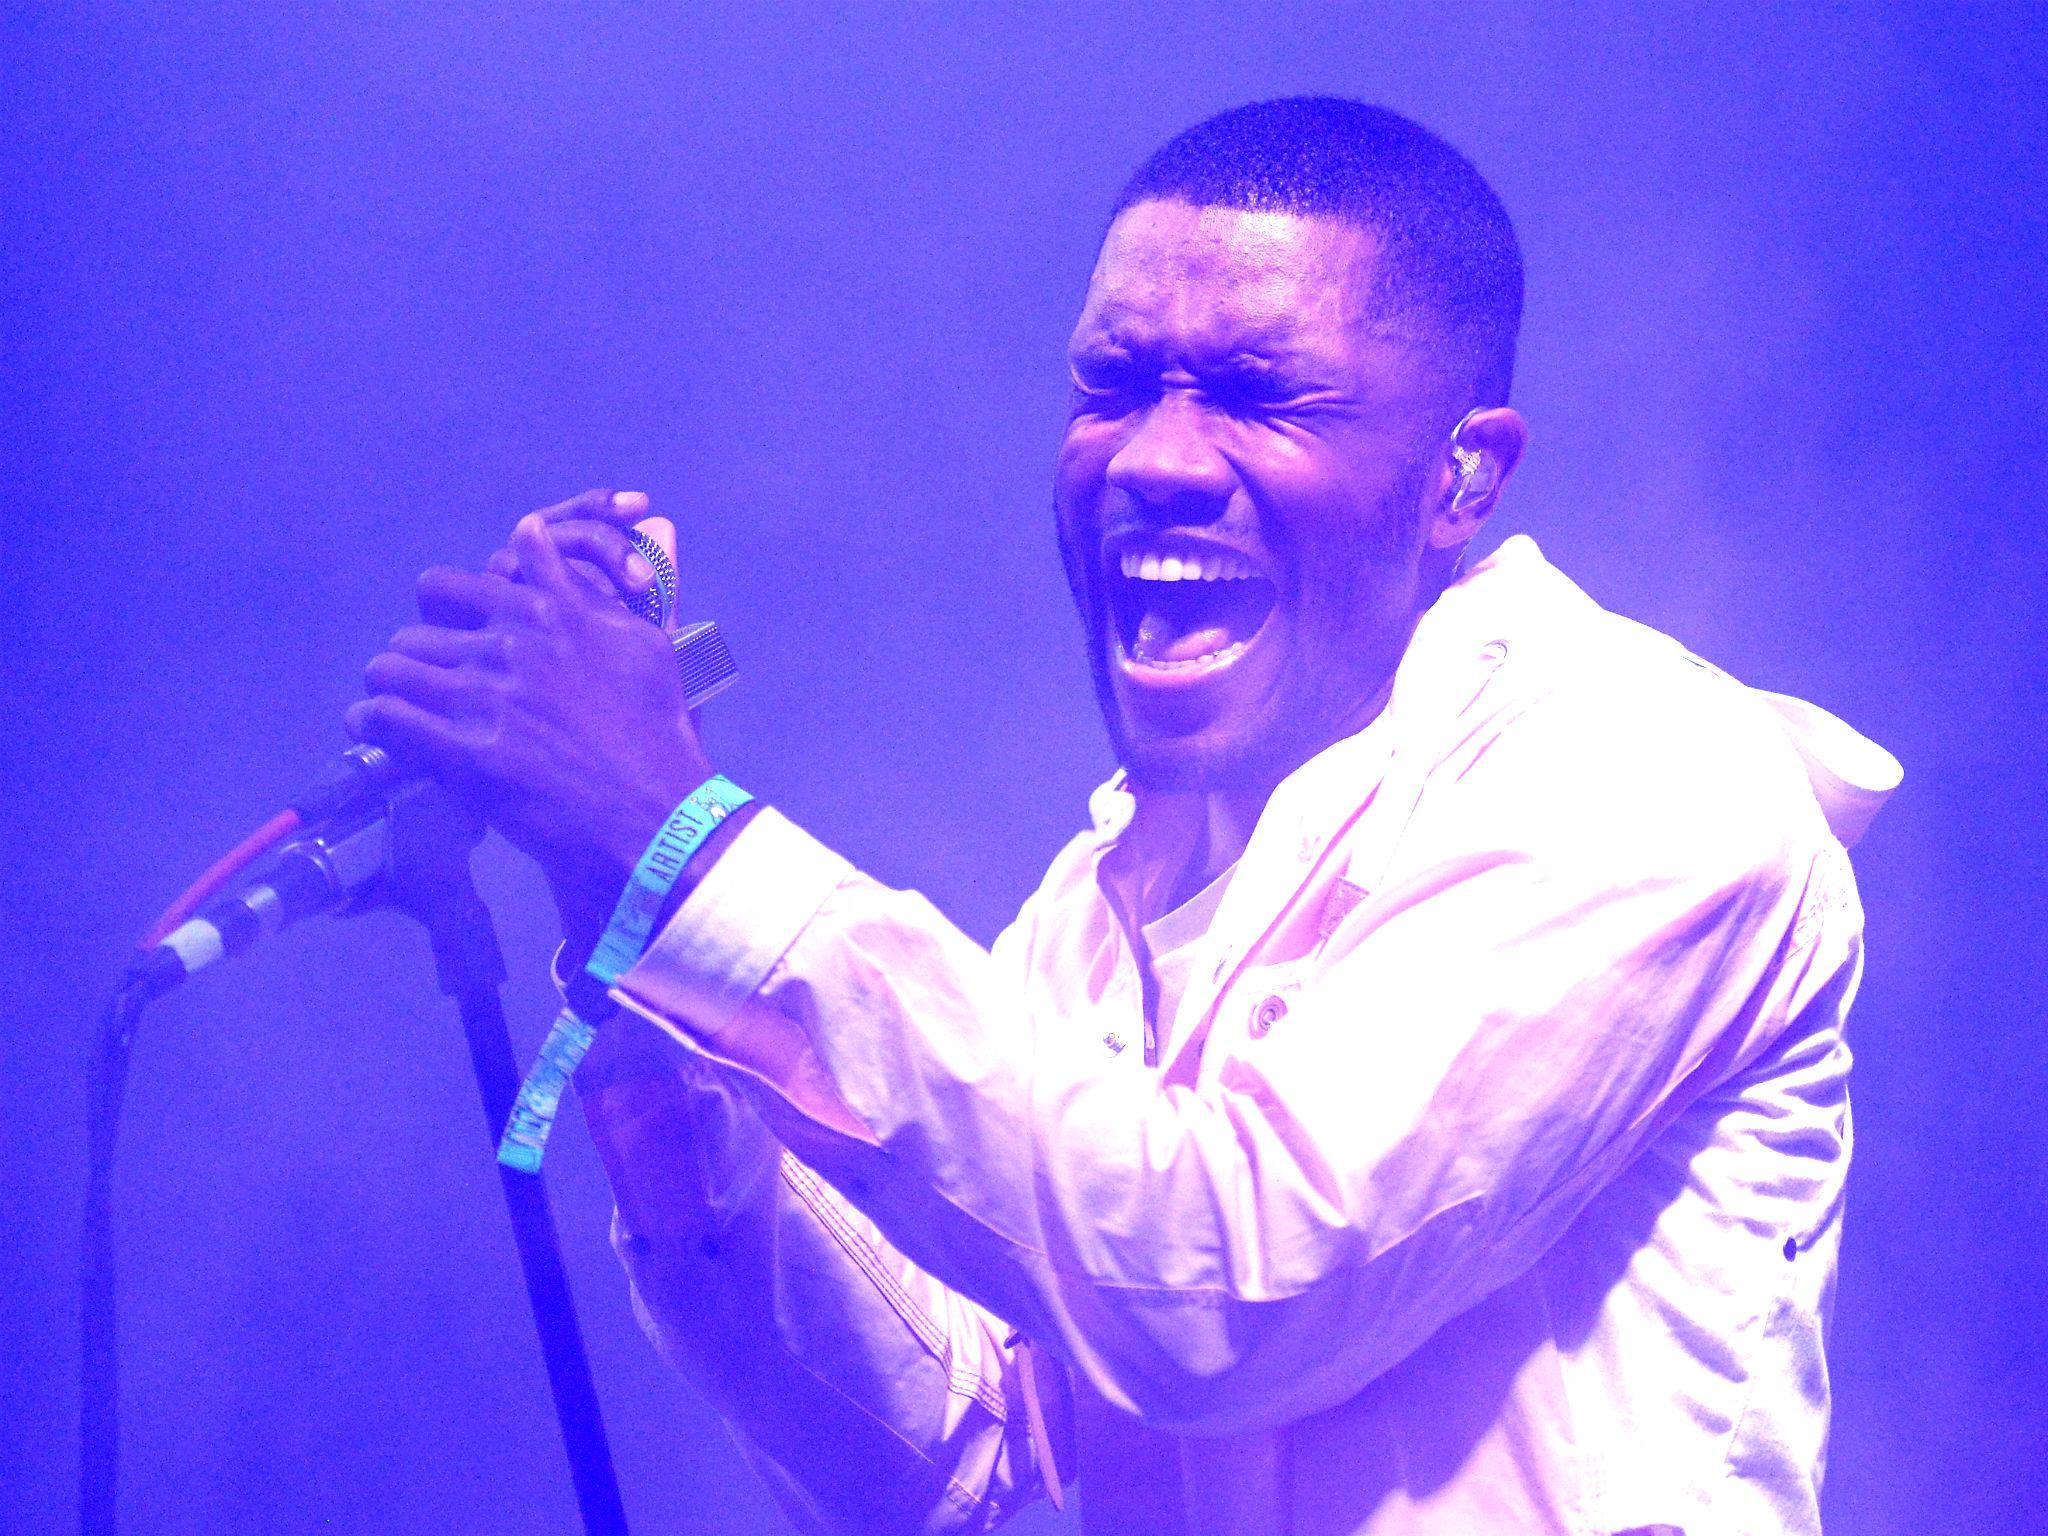 Frank Ocean's first album Channel Orange came out in 2012 and fans have been waiting for more music ever since